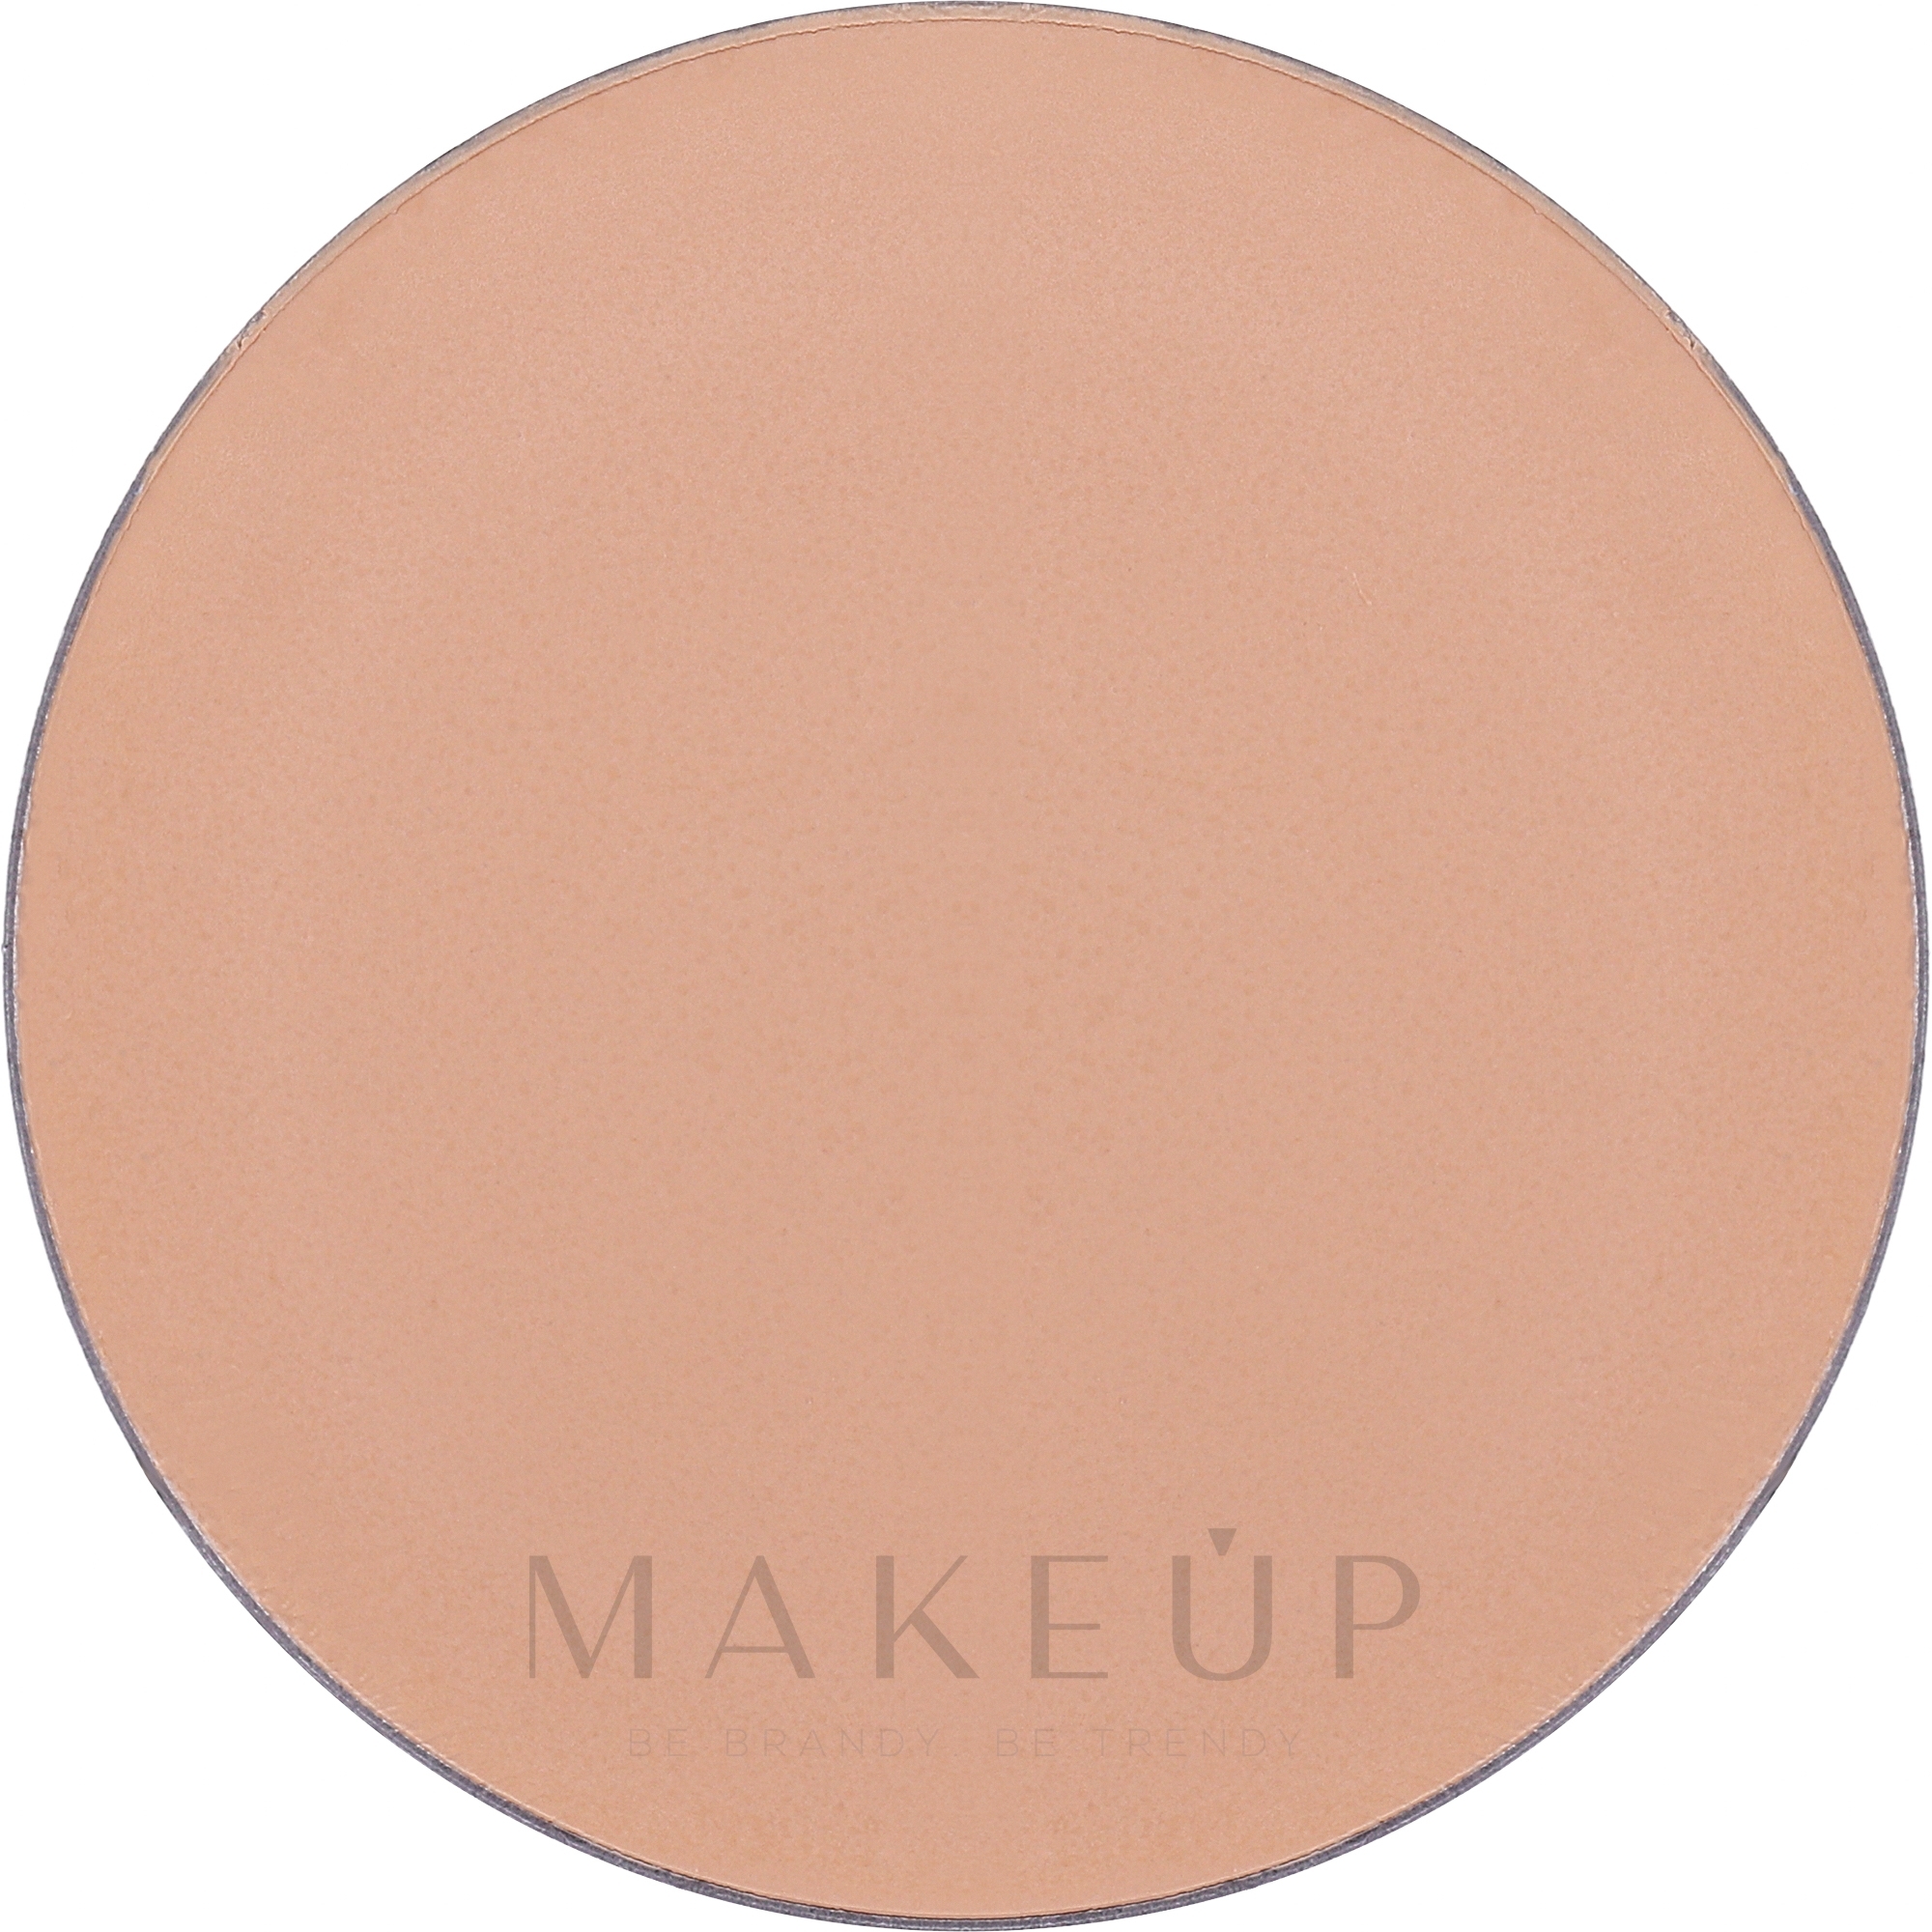 Cremiger Gesichts-Concealer - Lord & Berry Flawless Creamy Concealer (Refill) — Bild #1506 - Porcelain